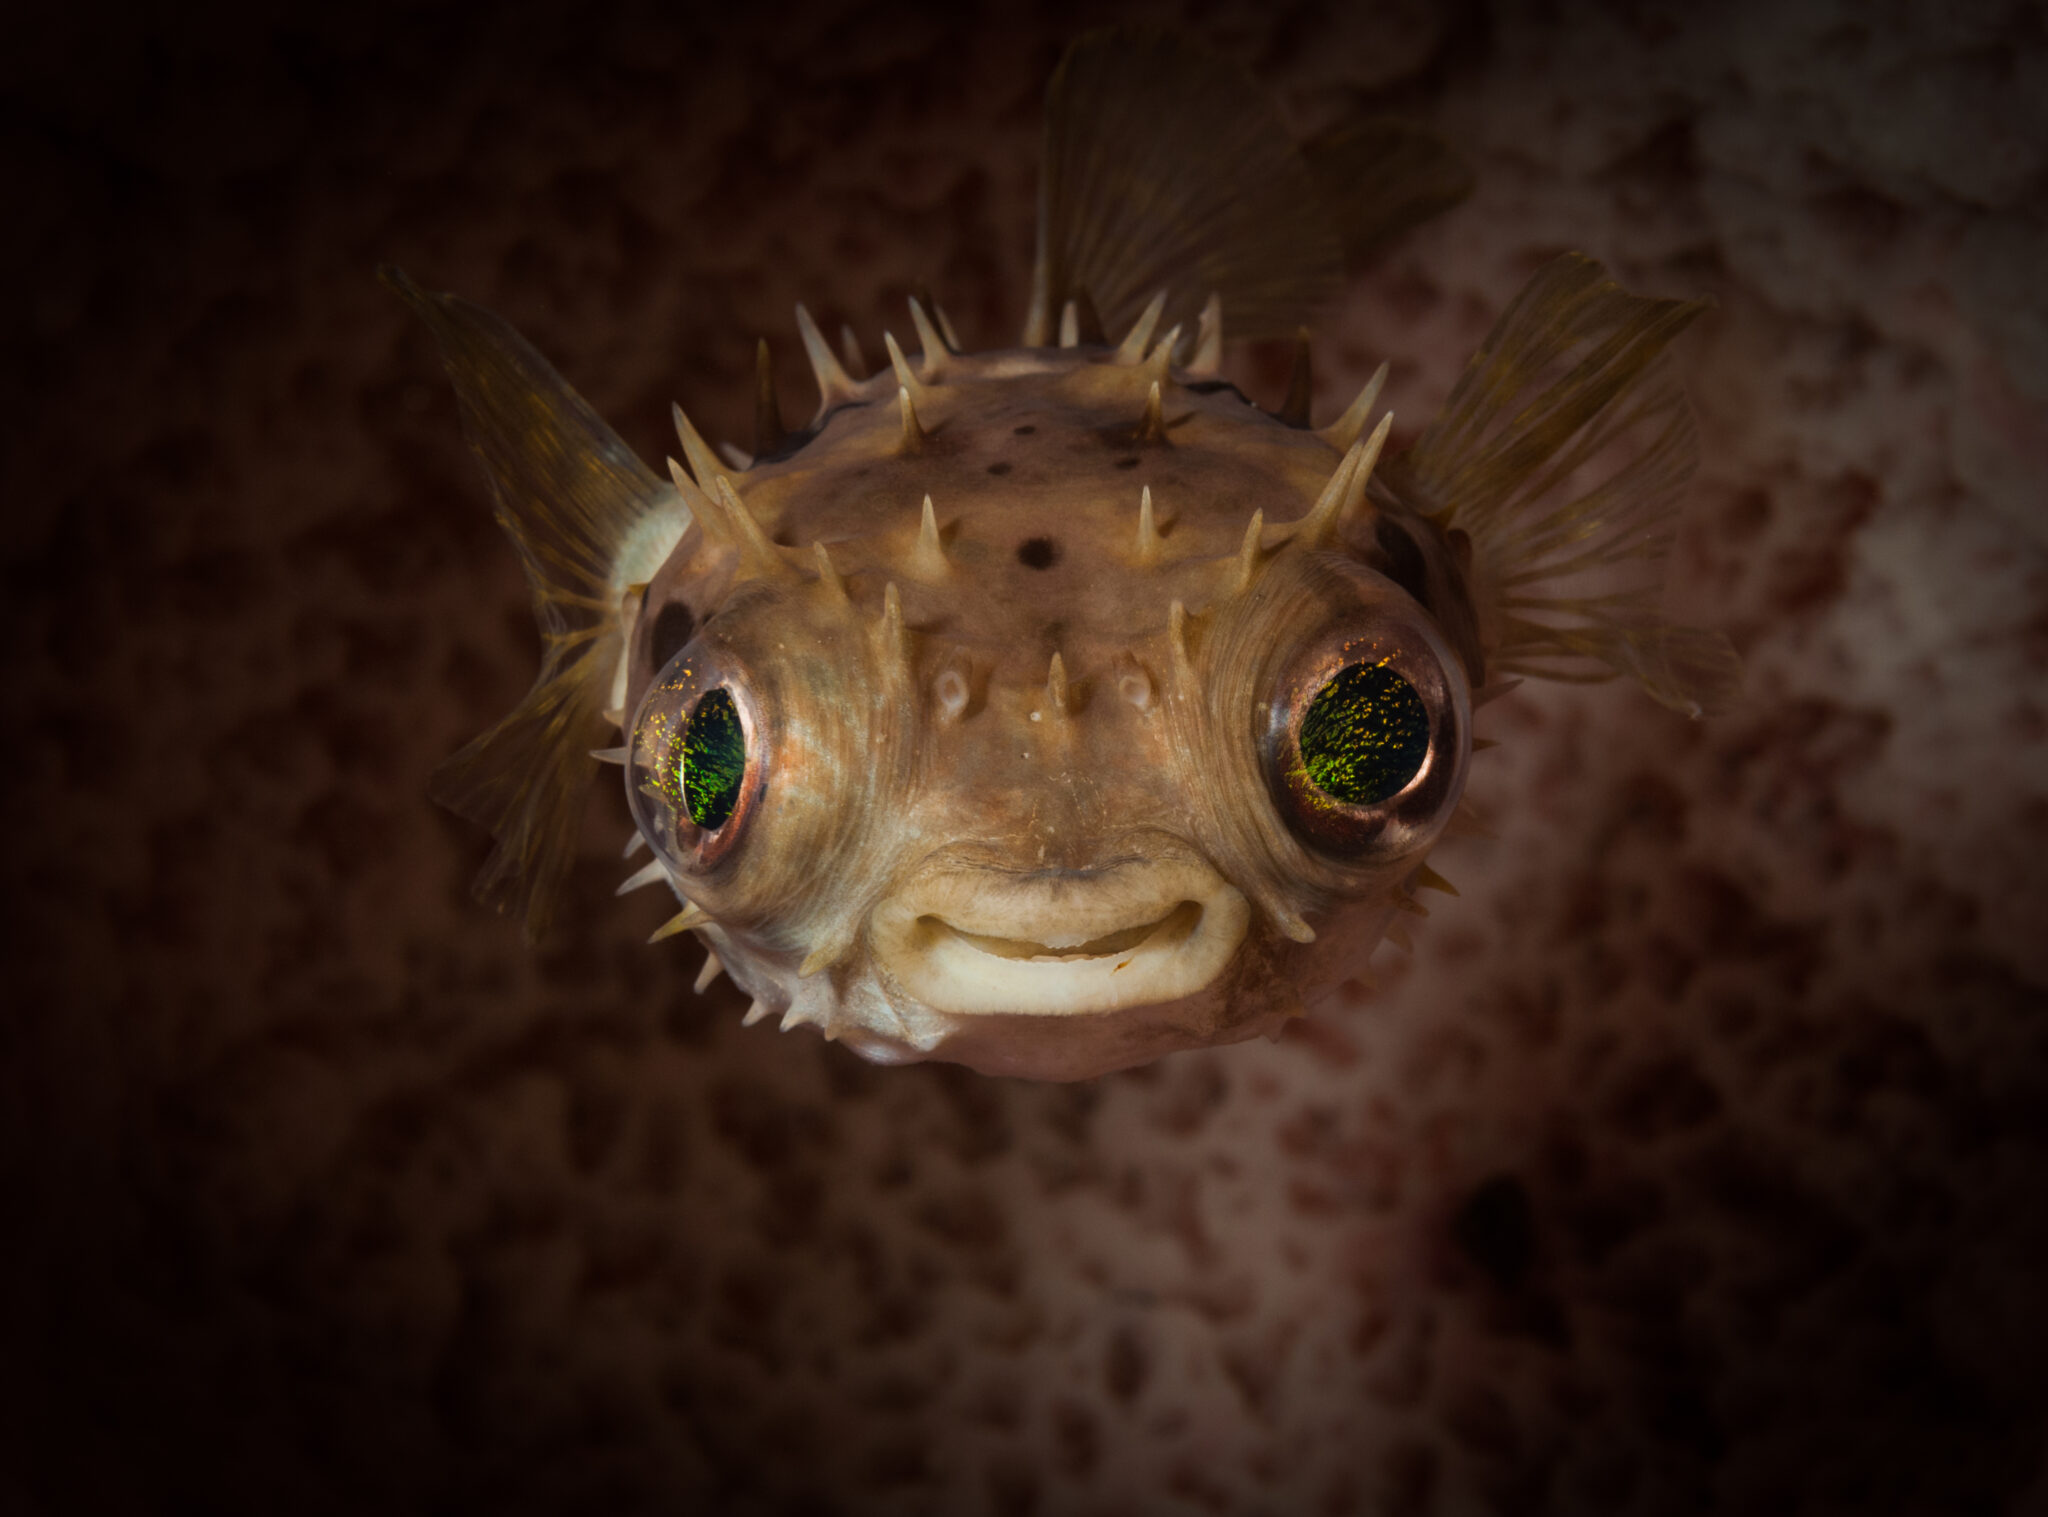 burrfish in lembeh, indonesia as spotted by a scuba diver